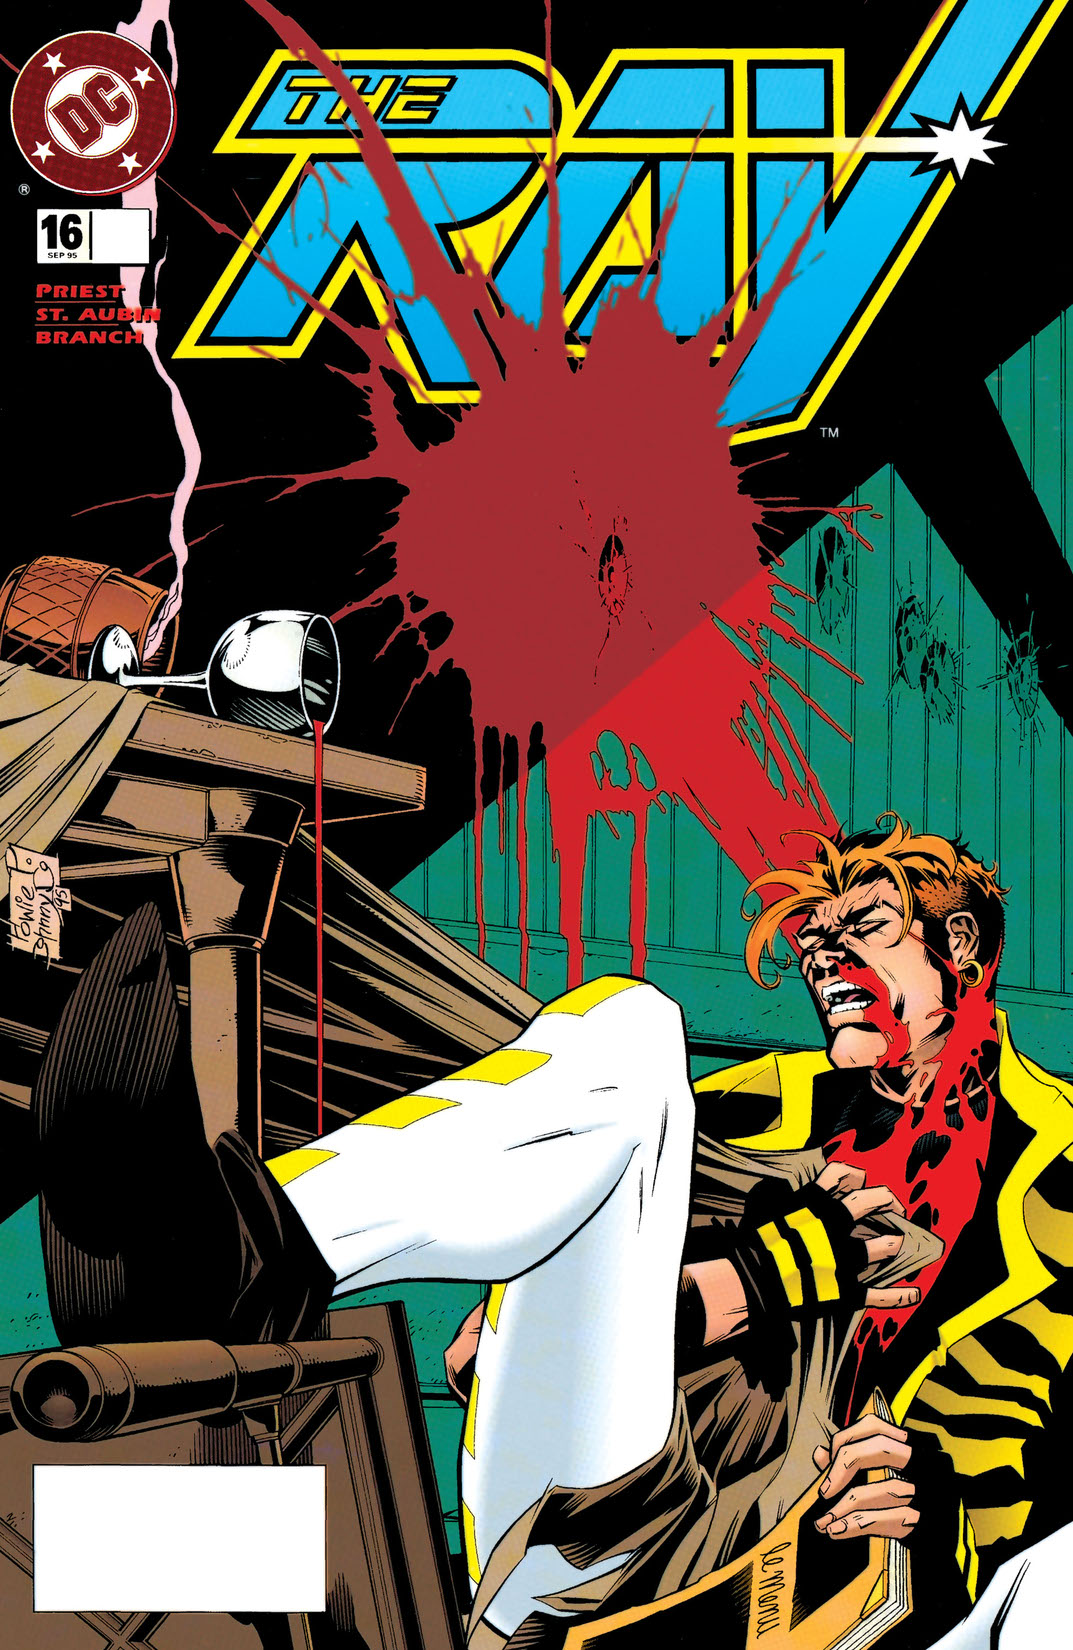 The Ray (1994-) #16 preview images